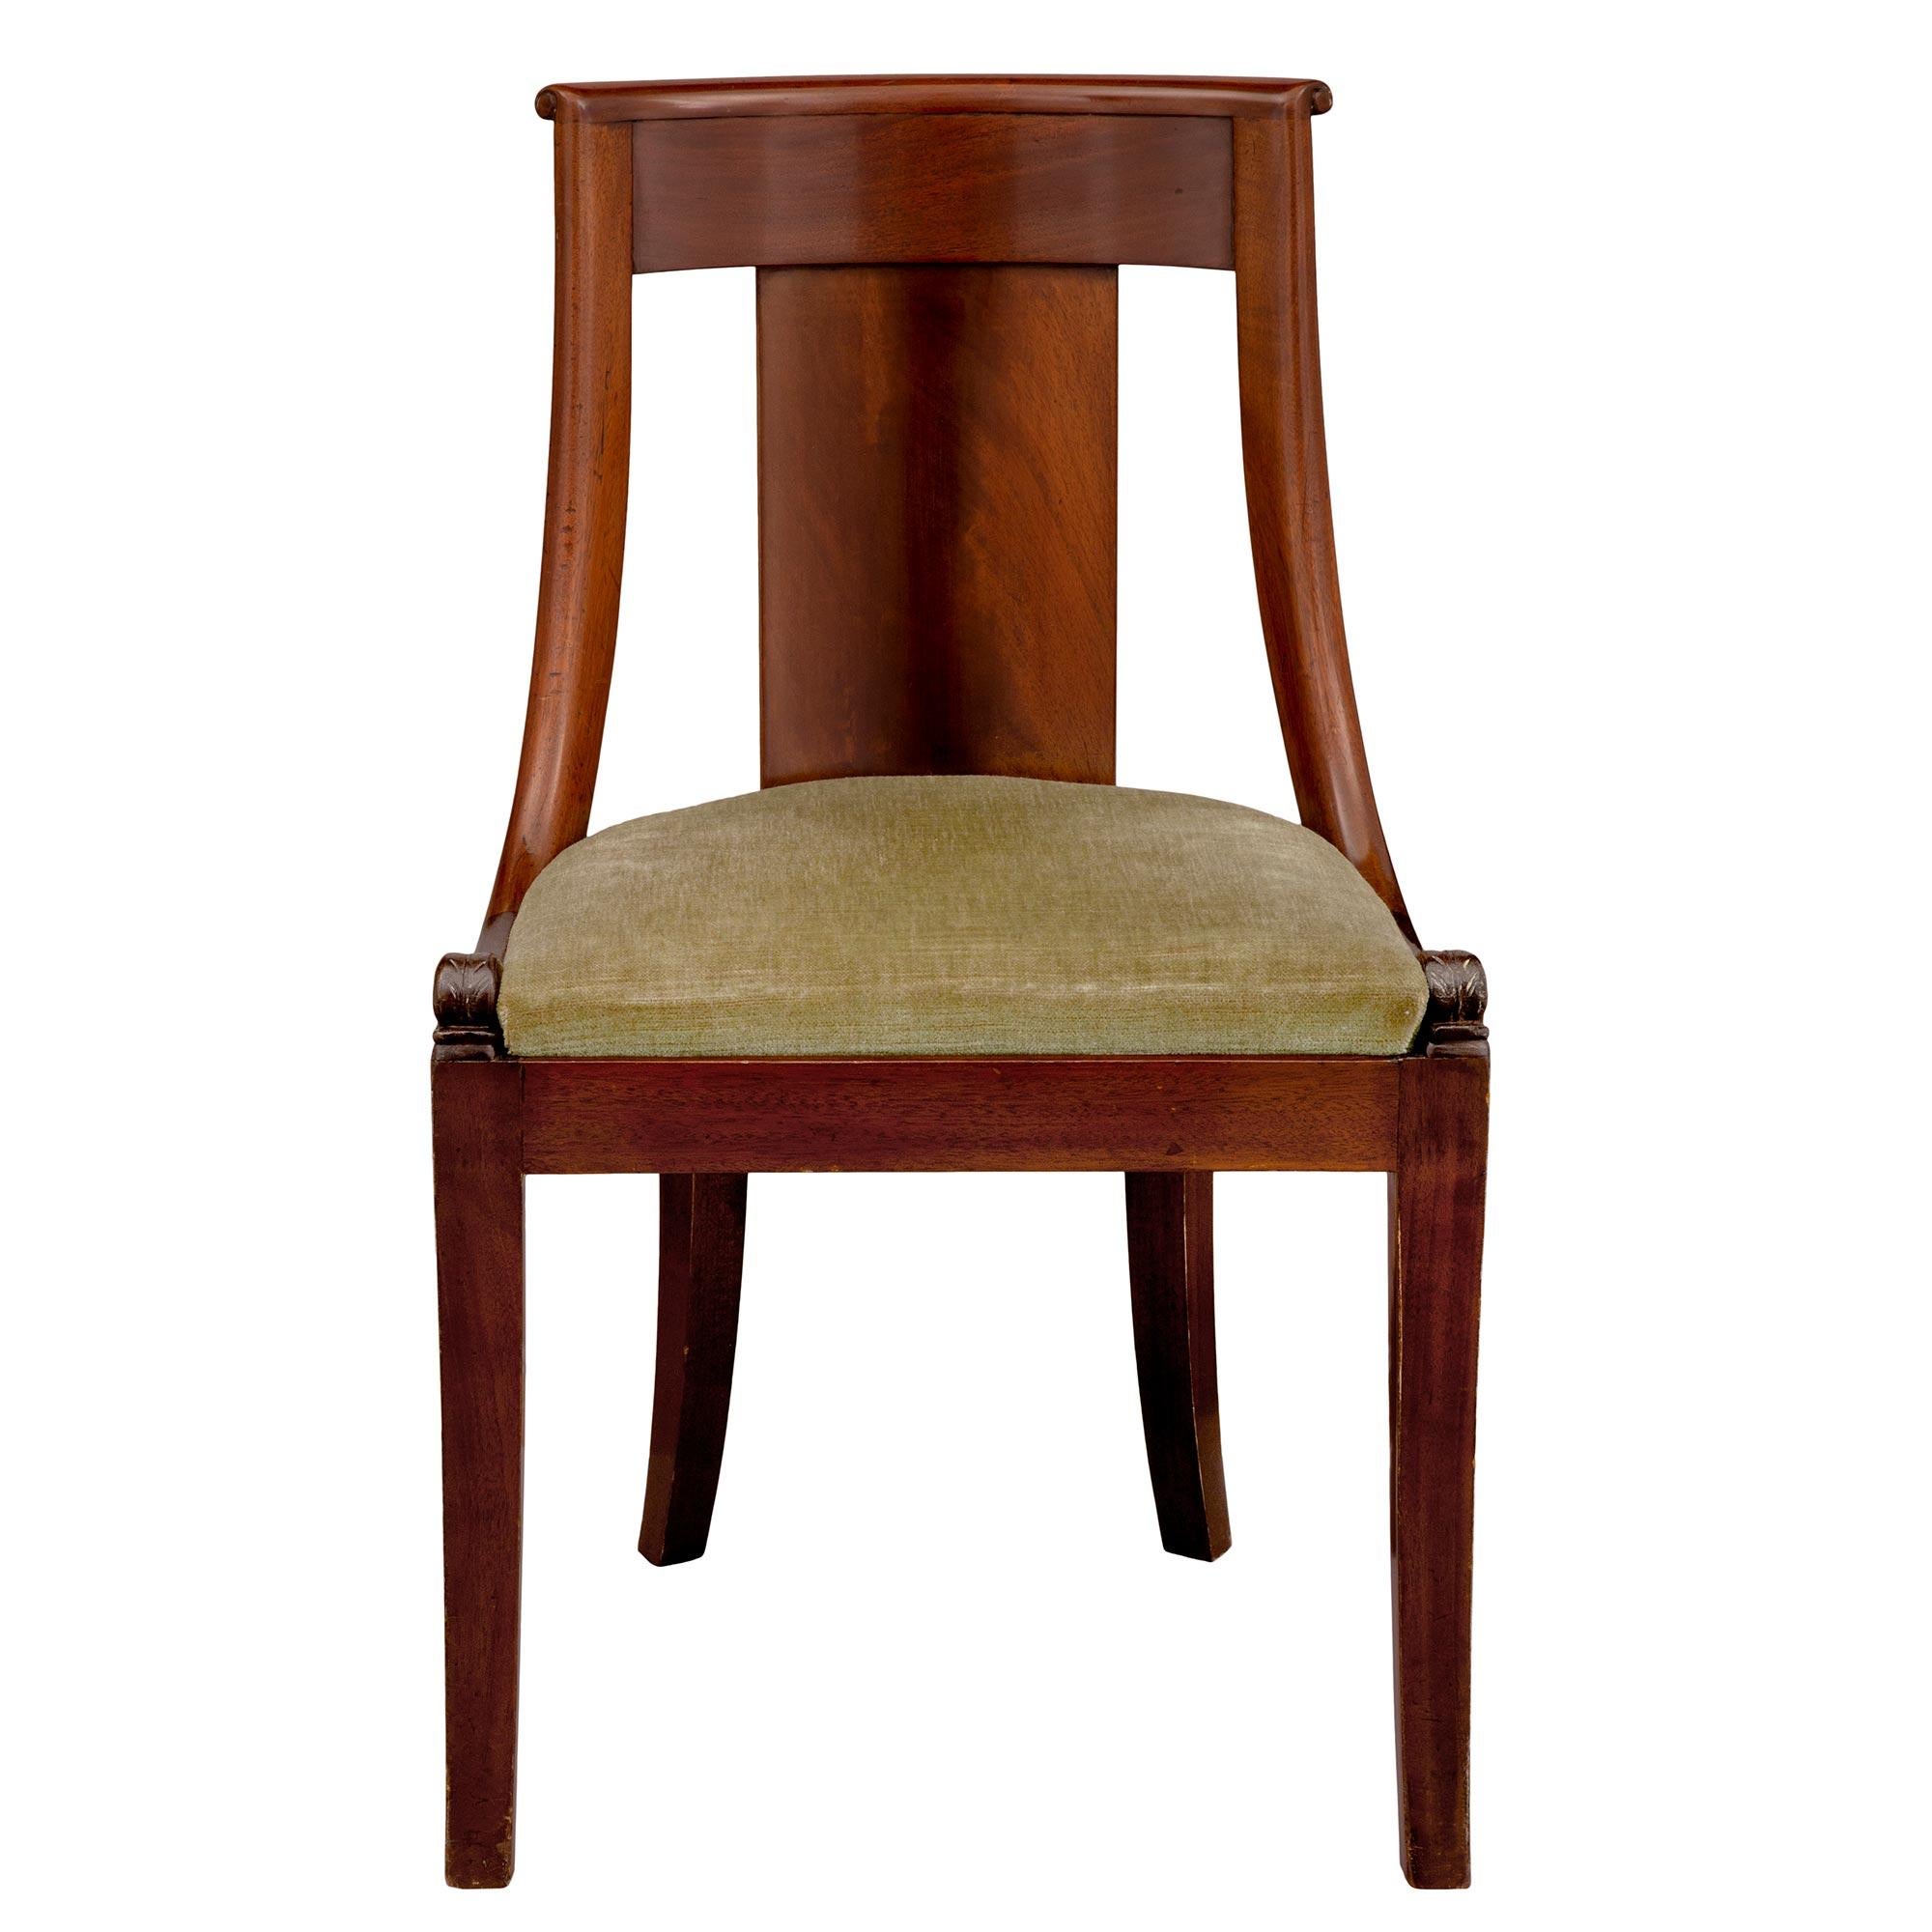 A most handsome set of eight French 19th century Empire style mahogany side/dining chairs. Each chair is raised by elegant slightly curved square tapered legs. Above the straight frieze are striking richly carved dolphins at either side of the